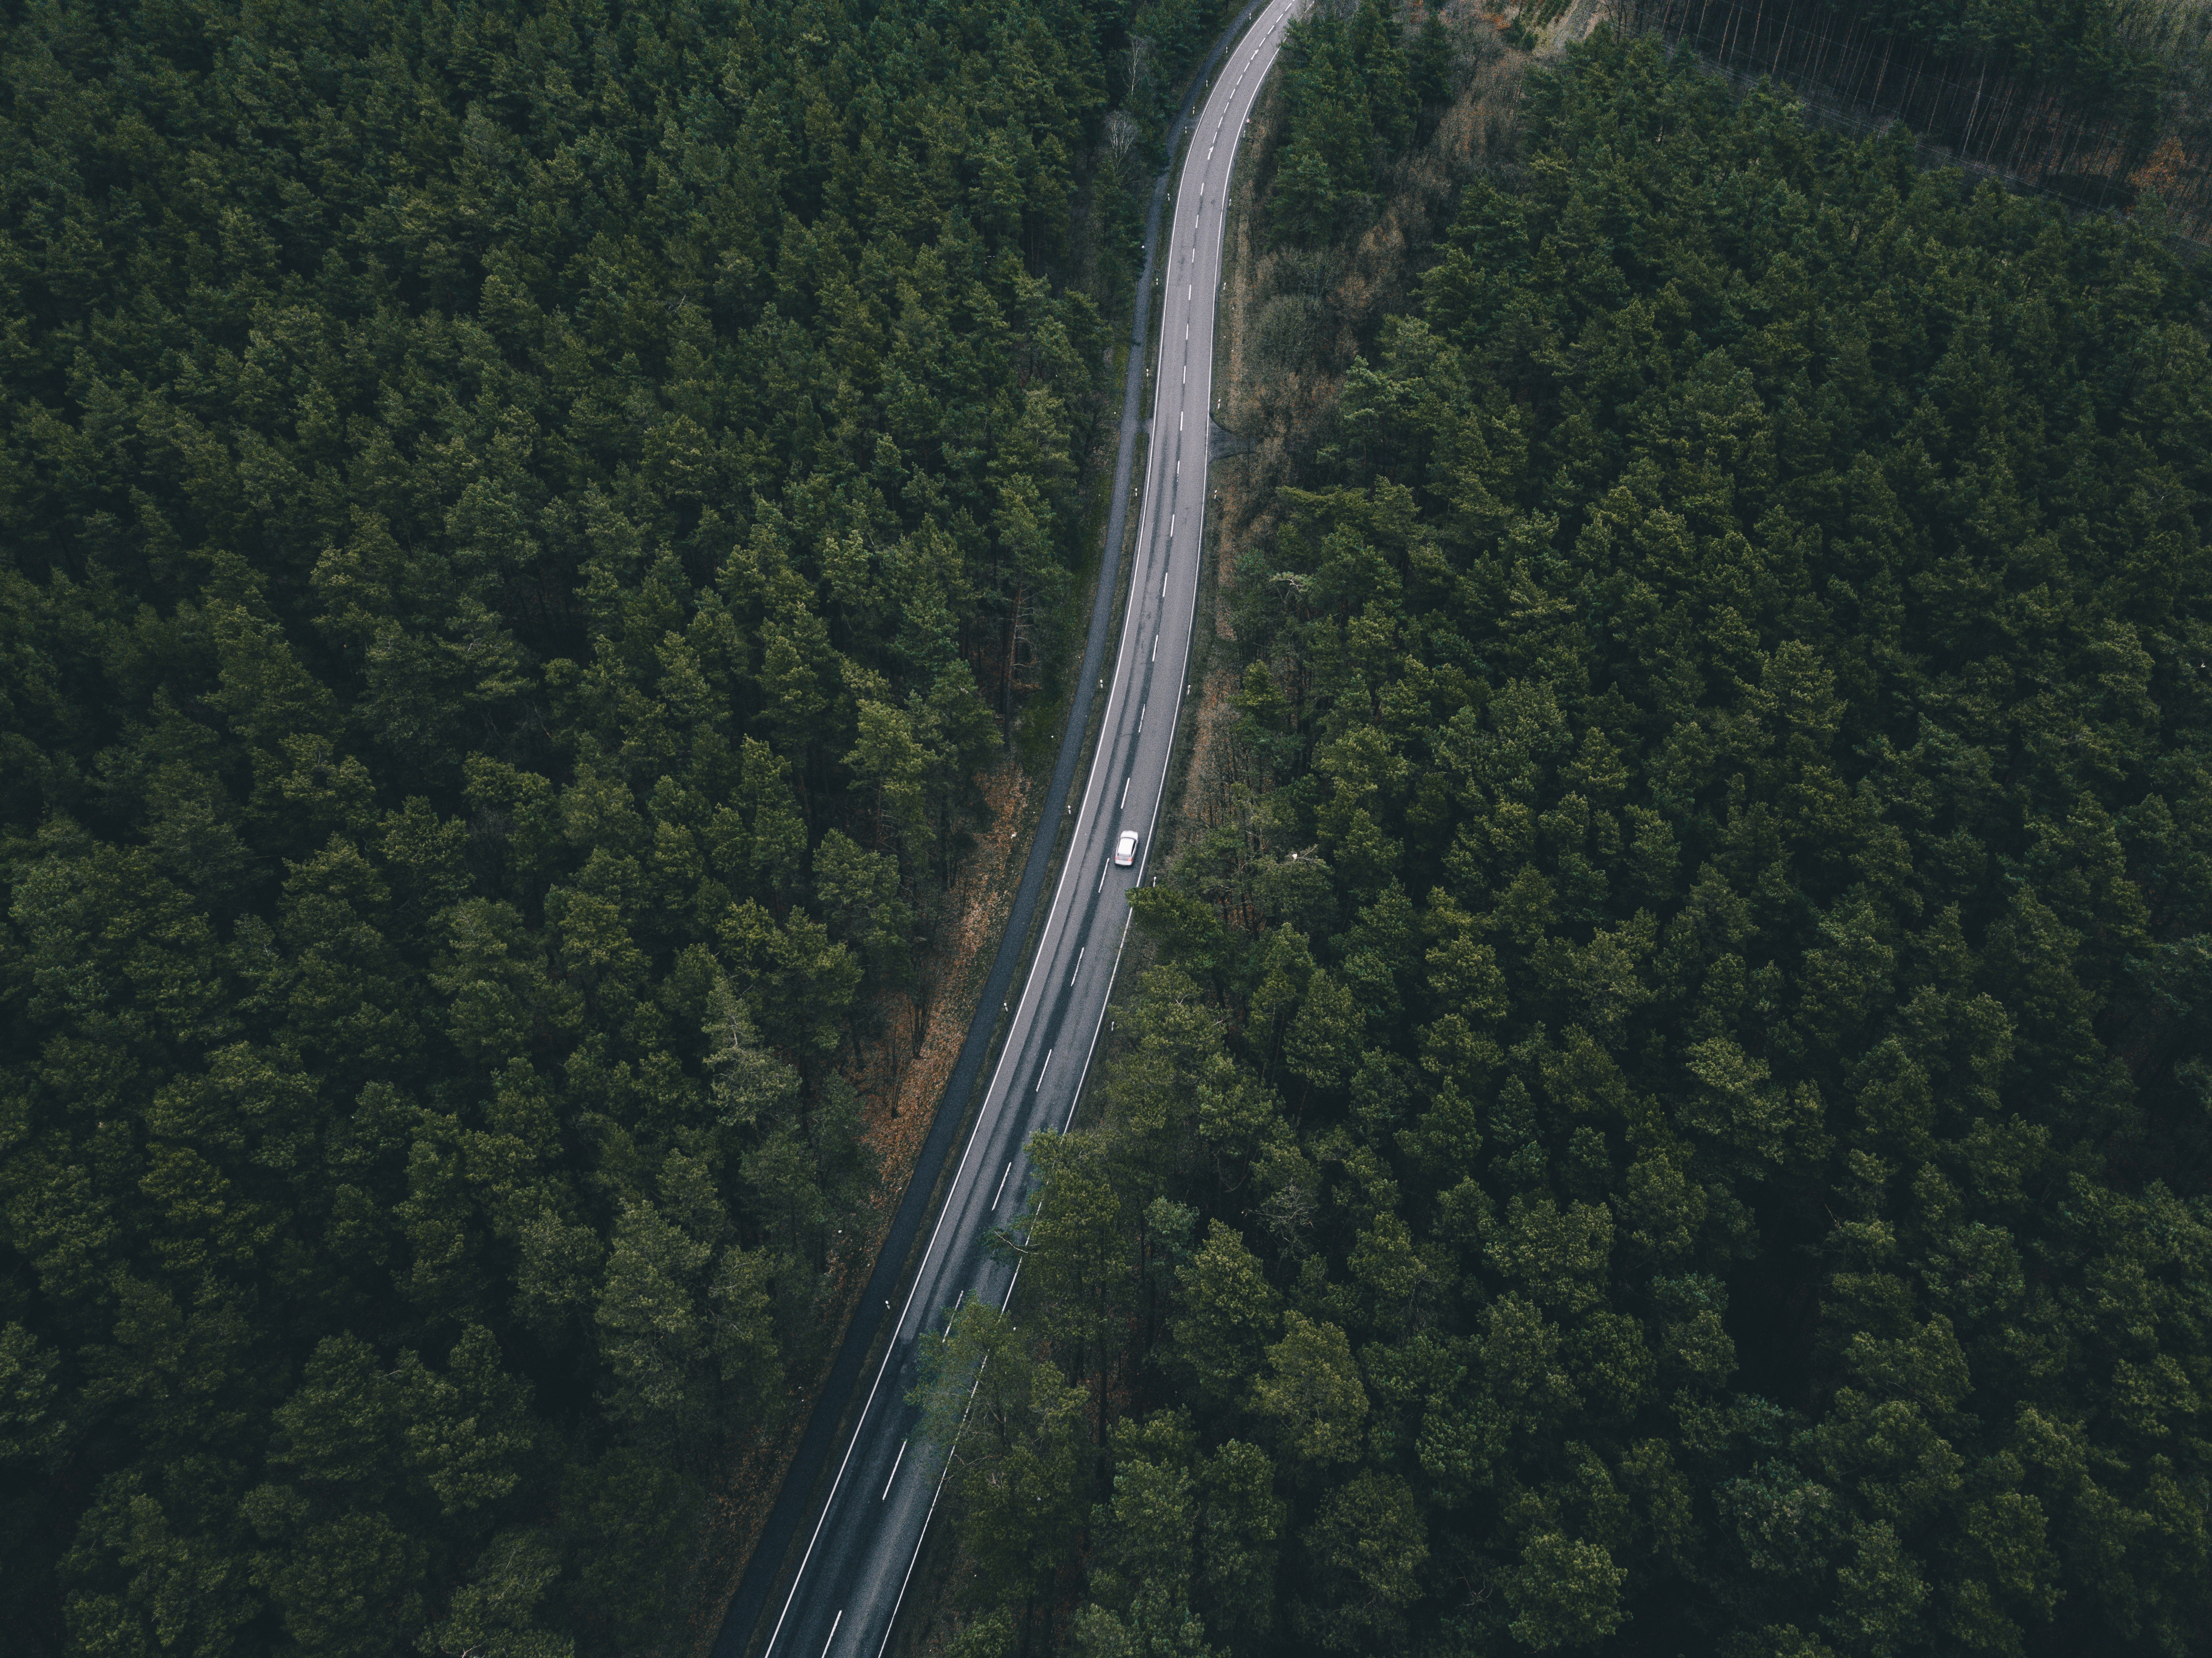 view from above, nature, trees, road